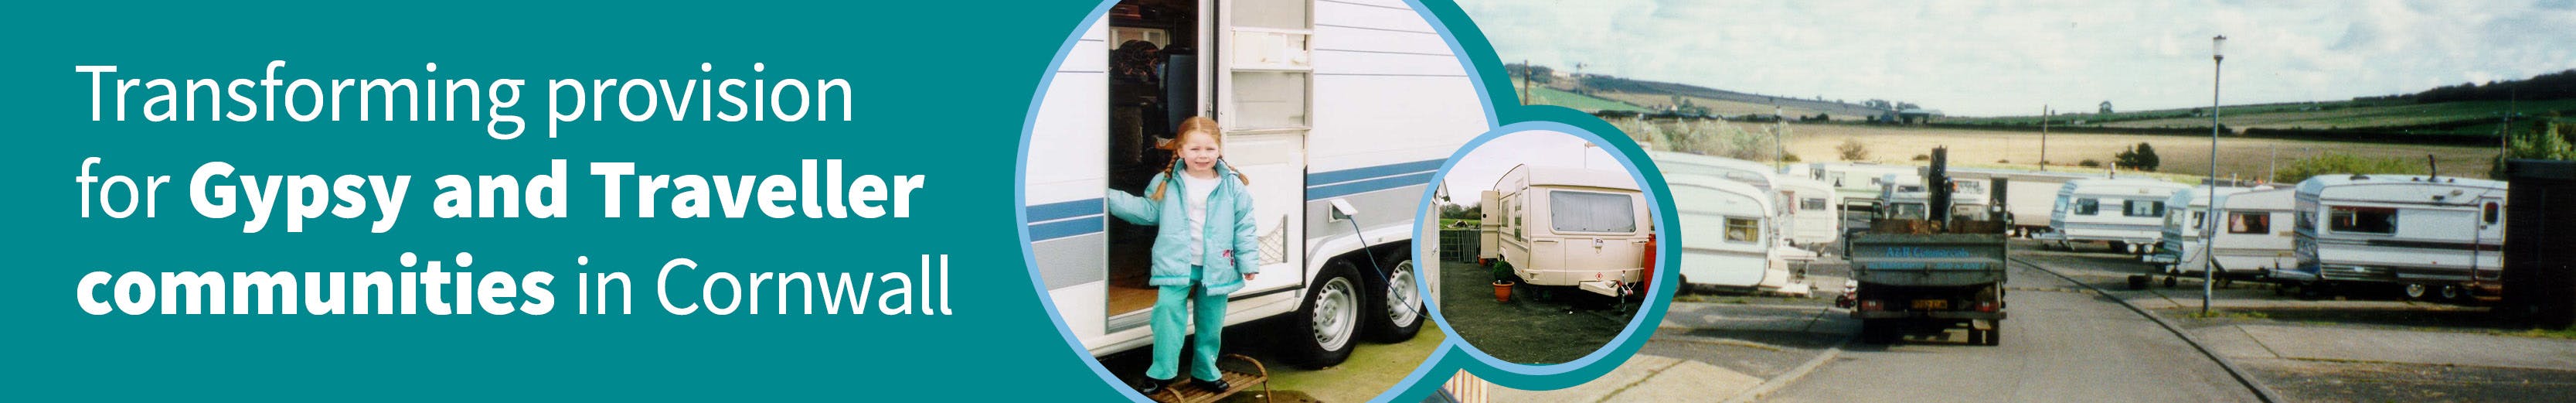 Transforming provision for Gypsy and Traveller communities in Cornwall